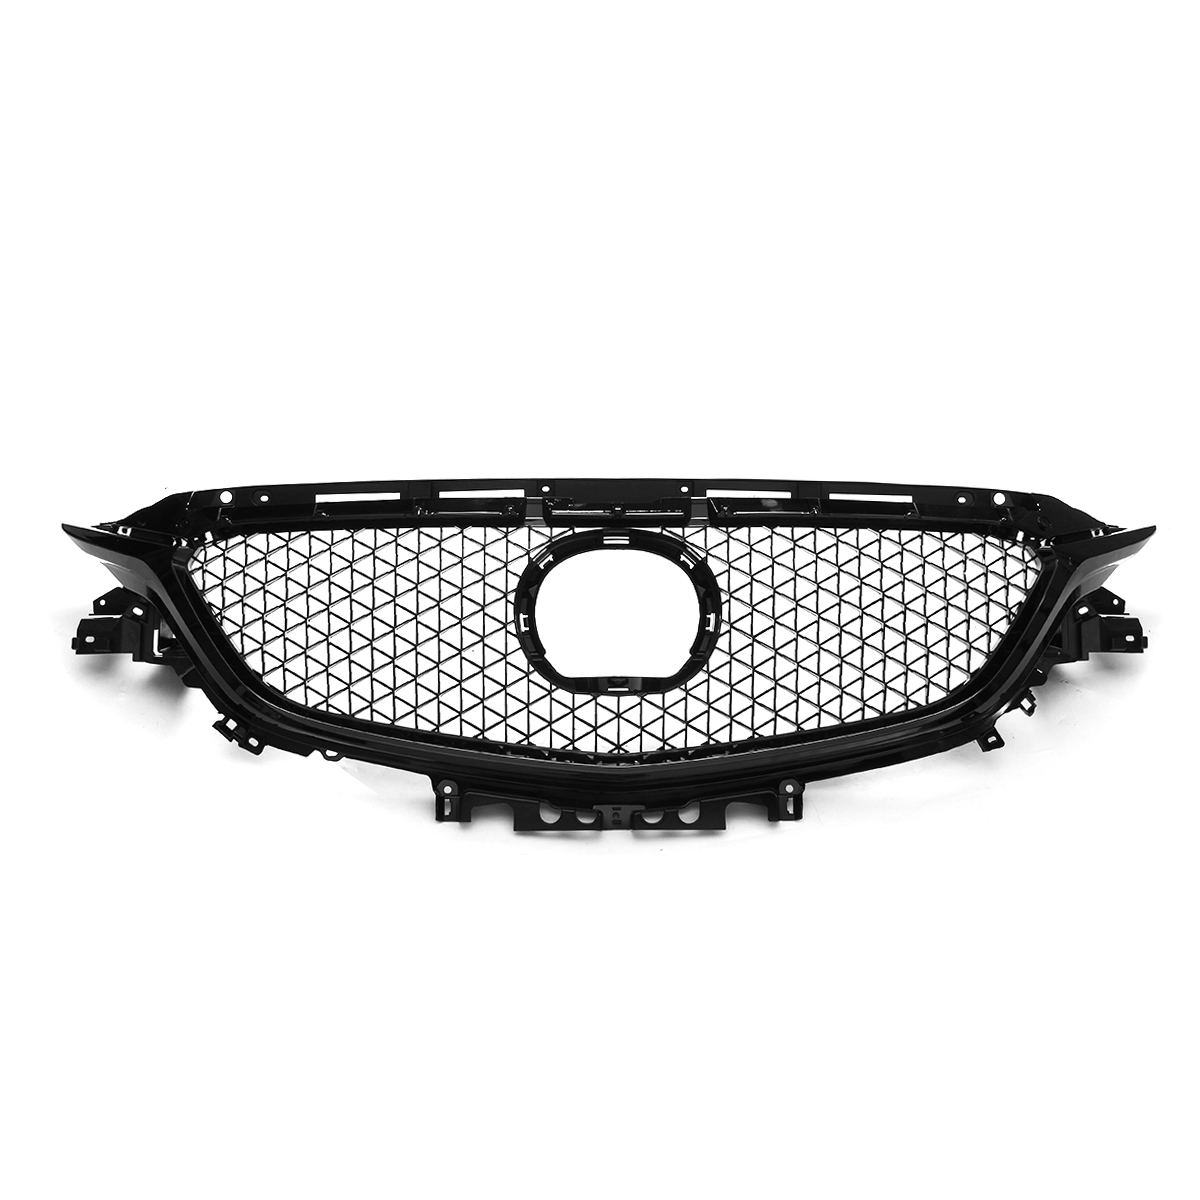 

Honeycomb Front Bumper Mesh Racing Grille Grill for MAZDA 6 ATENZA 2017 2018